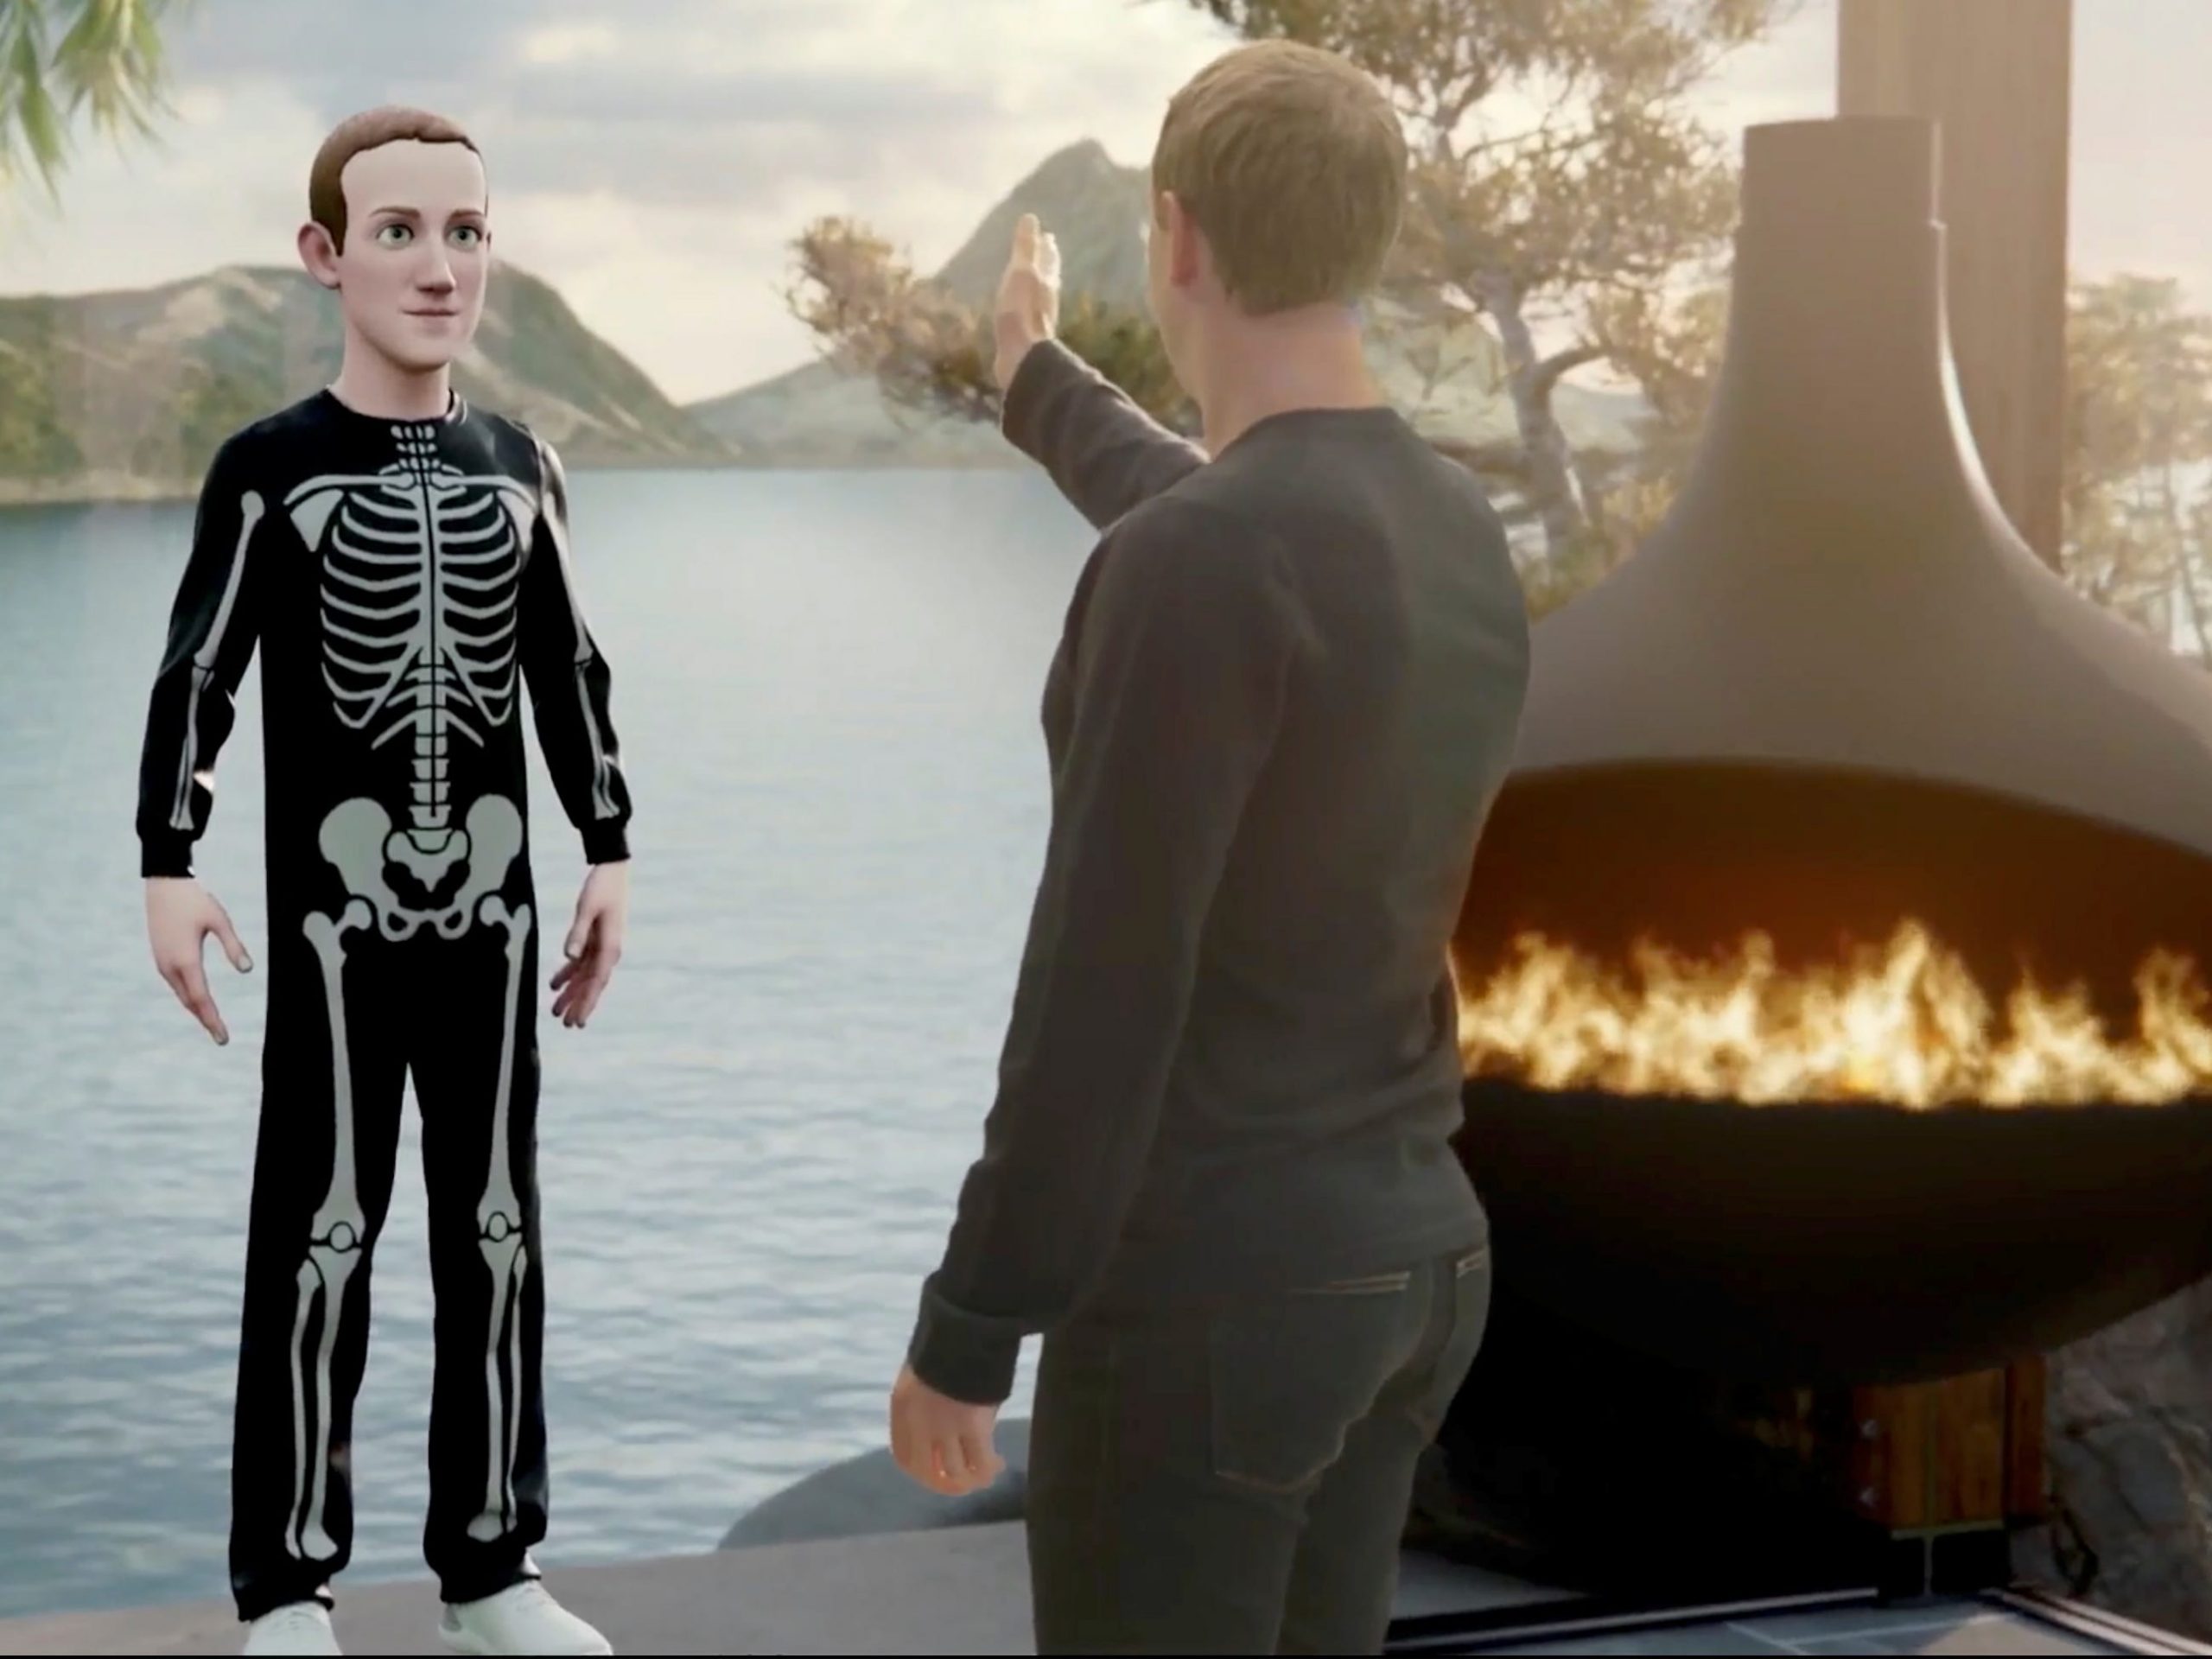 Facebook CEO Mark Zuckerberg shows off his vision for the metaverse during Facebook's Oculus Connect conference on October 28, 2021.